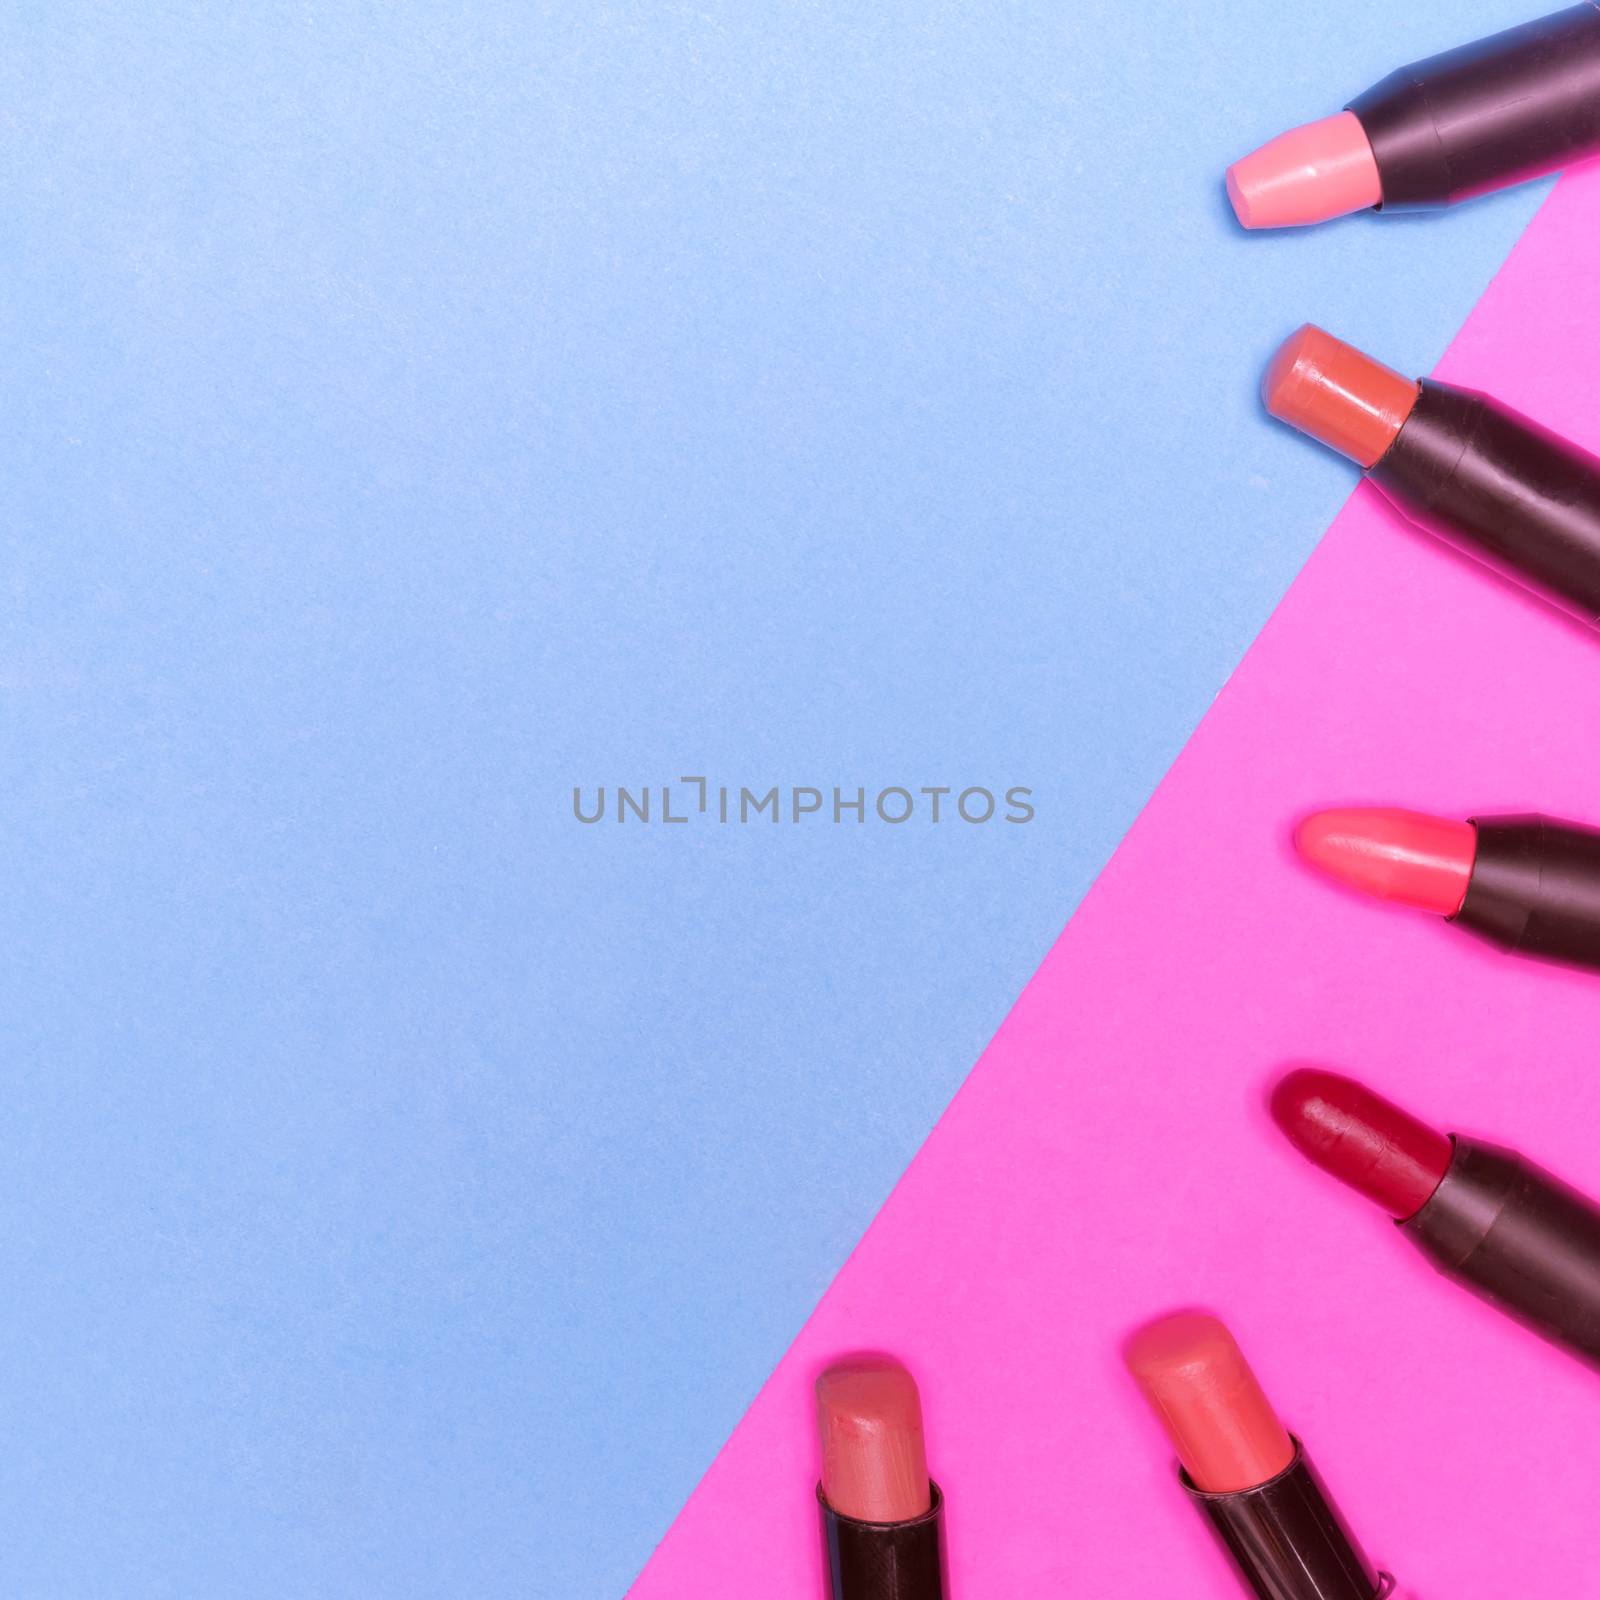 Lipsticks on colorful background.  Makeup and Beauty concept